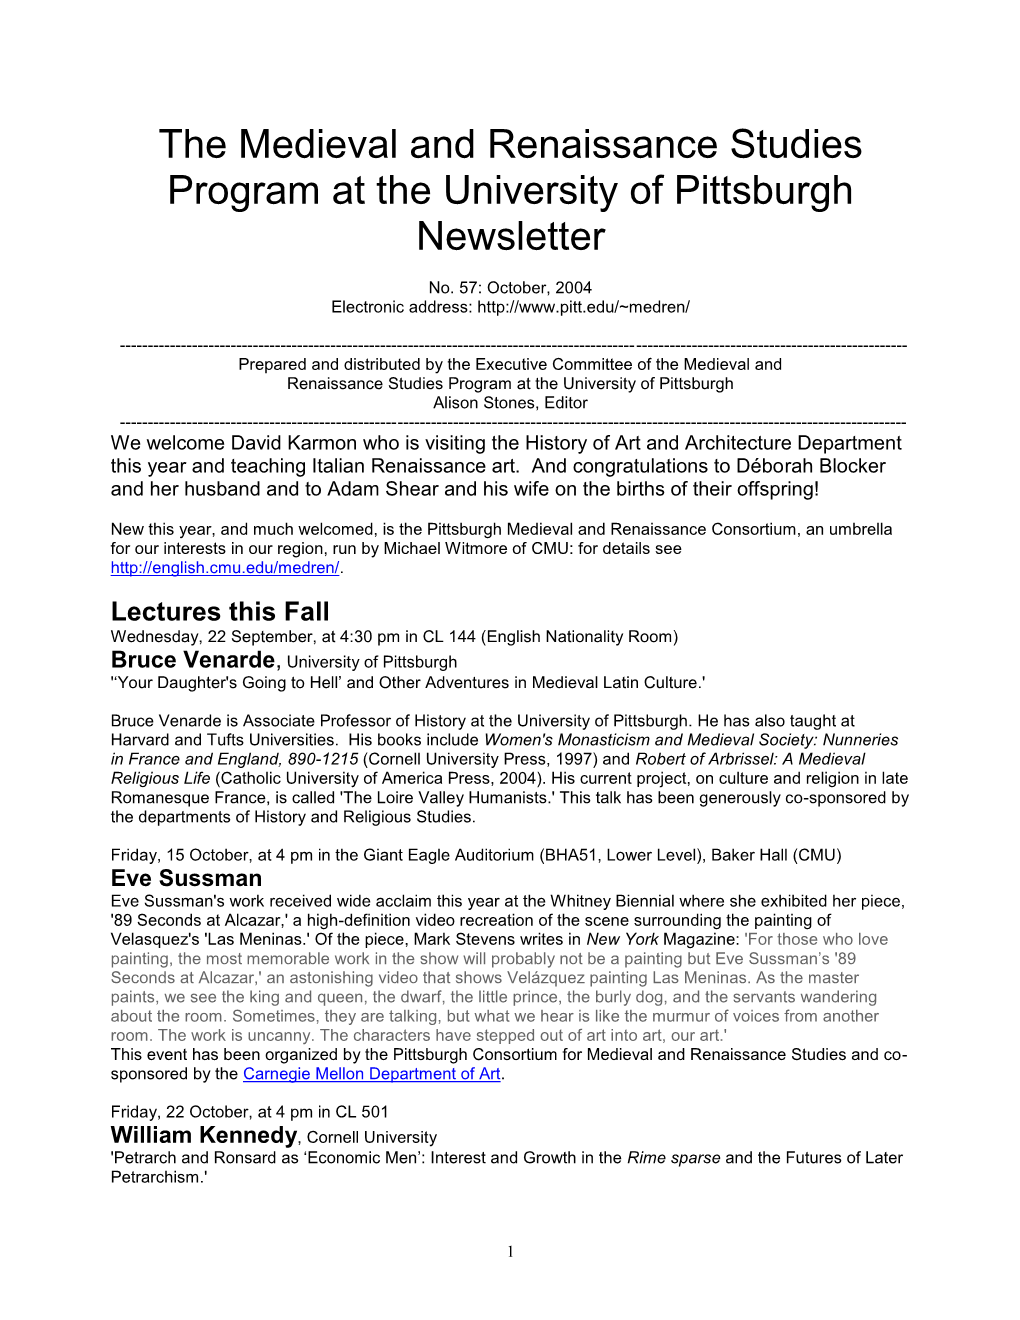 The Medieval and Renaissance Studies Program at the University of Pittsburgh Newsletter